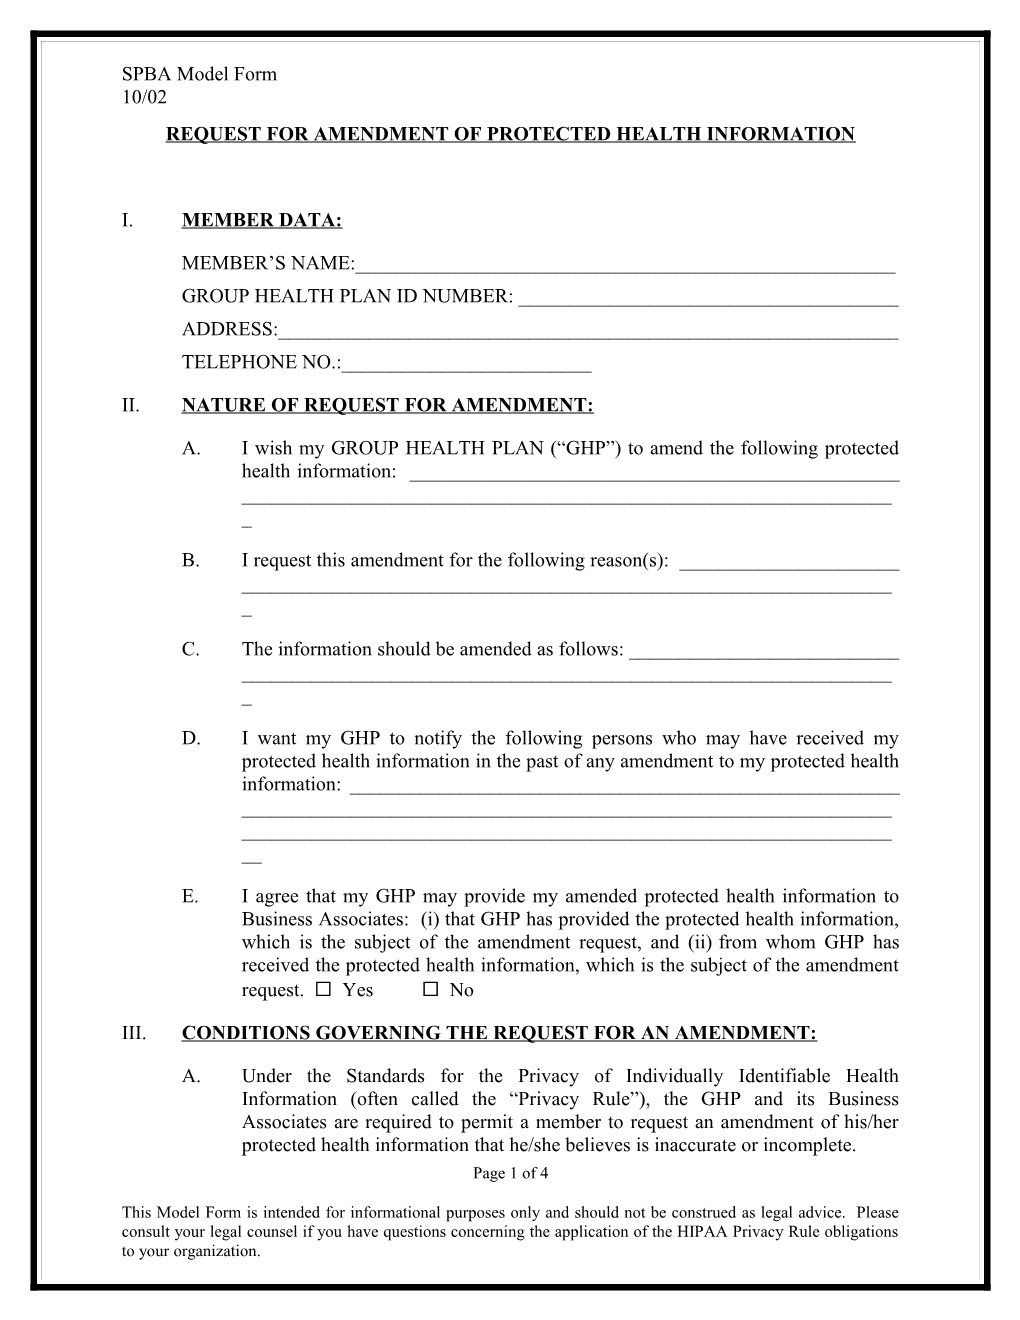 Request for Amendment of Protected Health Information